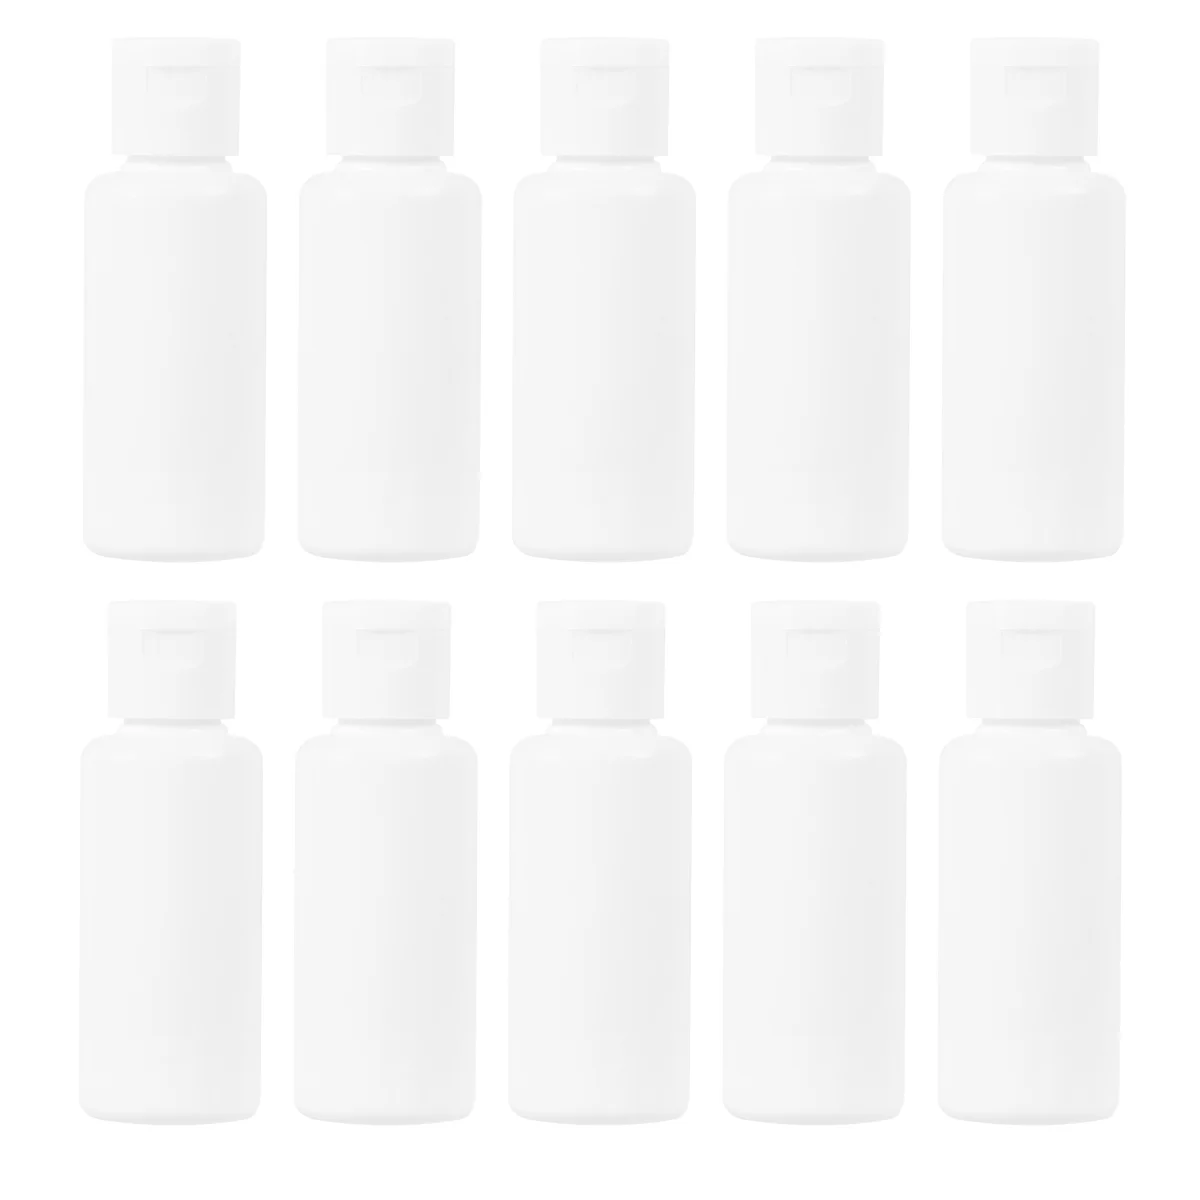 

30pcs 30ml Travel Bottles Leak Proof Refillable Toiletry Containers Lotion Dispenser Squeeze Bottle for Shampoo and Lotion